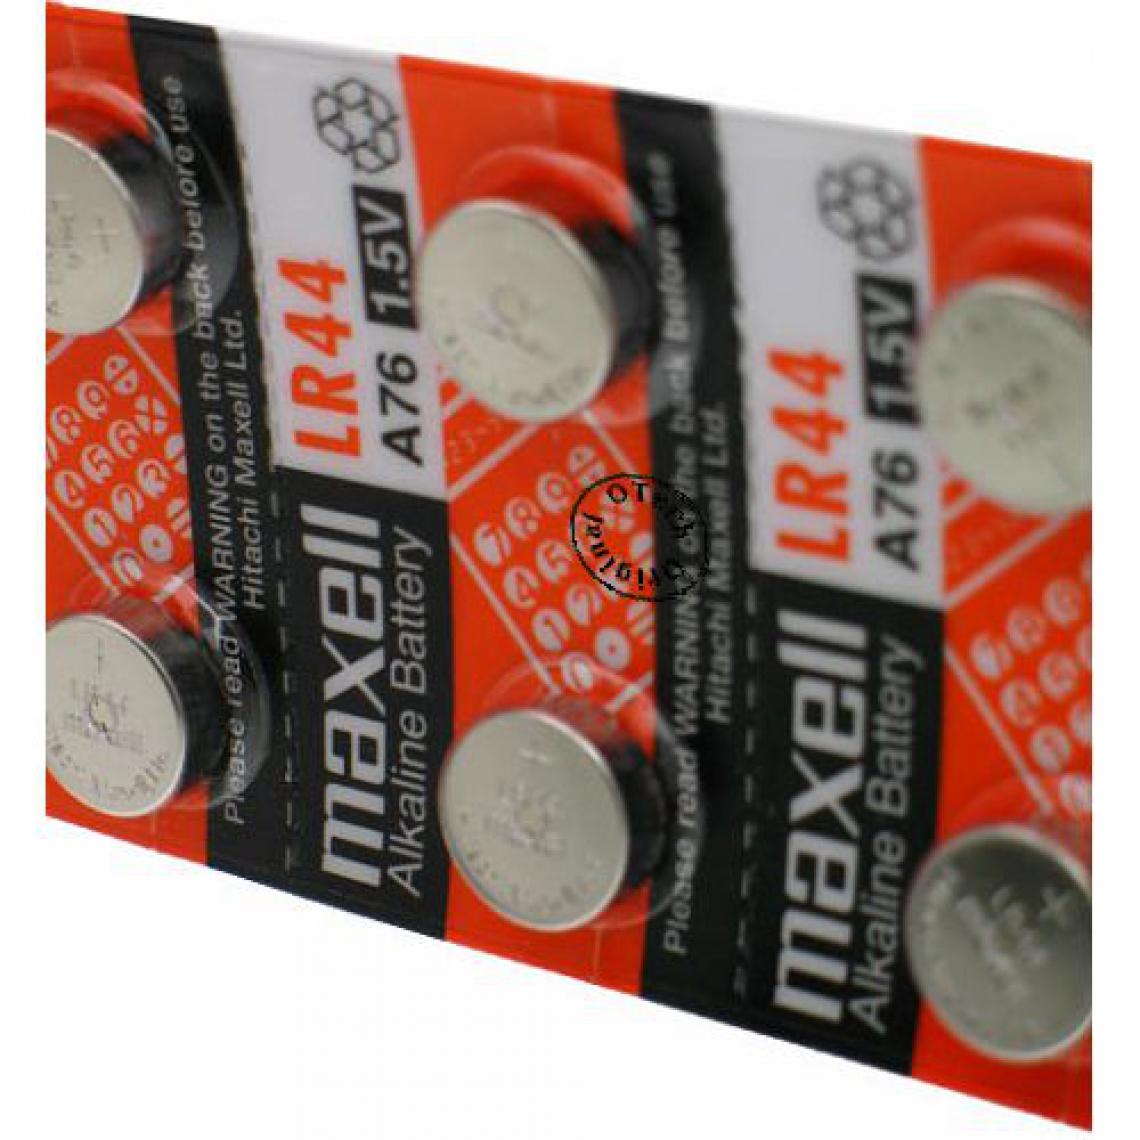 Otech - Pack de 10 piles maxell pour MAXELL A613 - Piles rechargeables